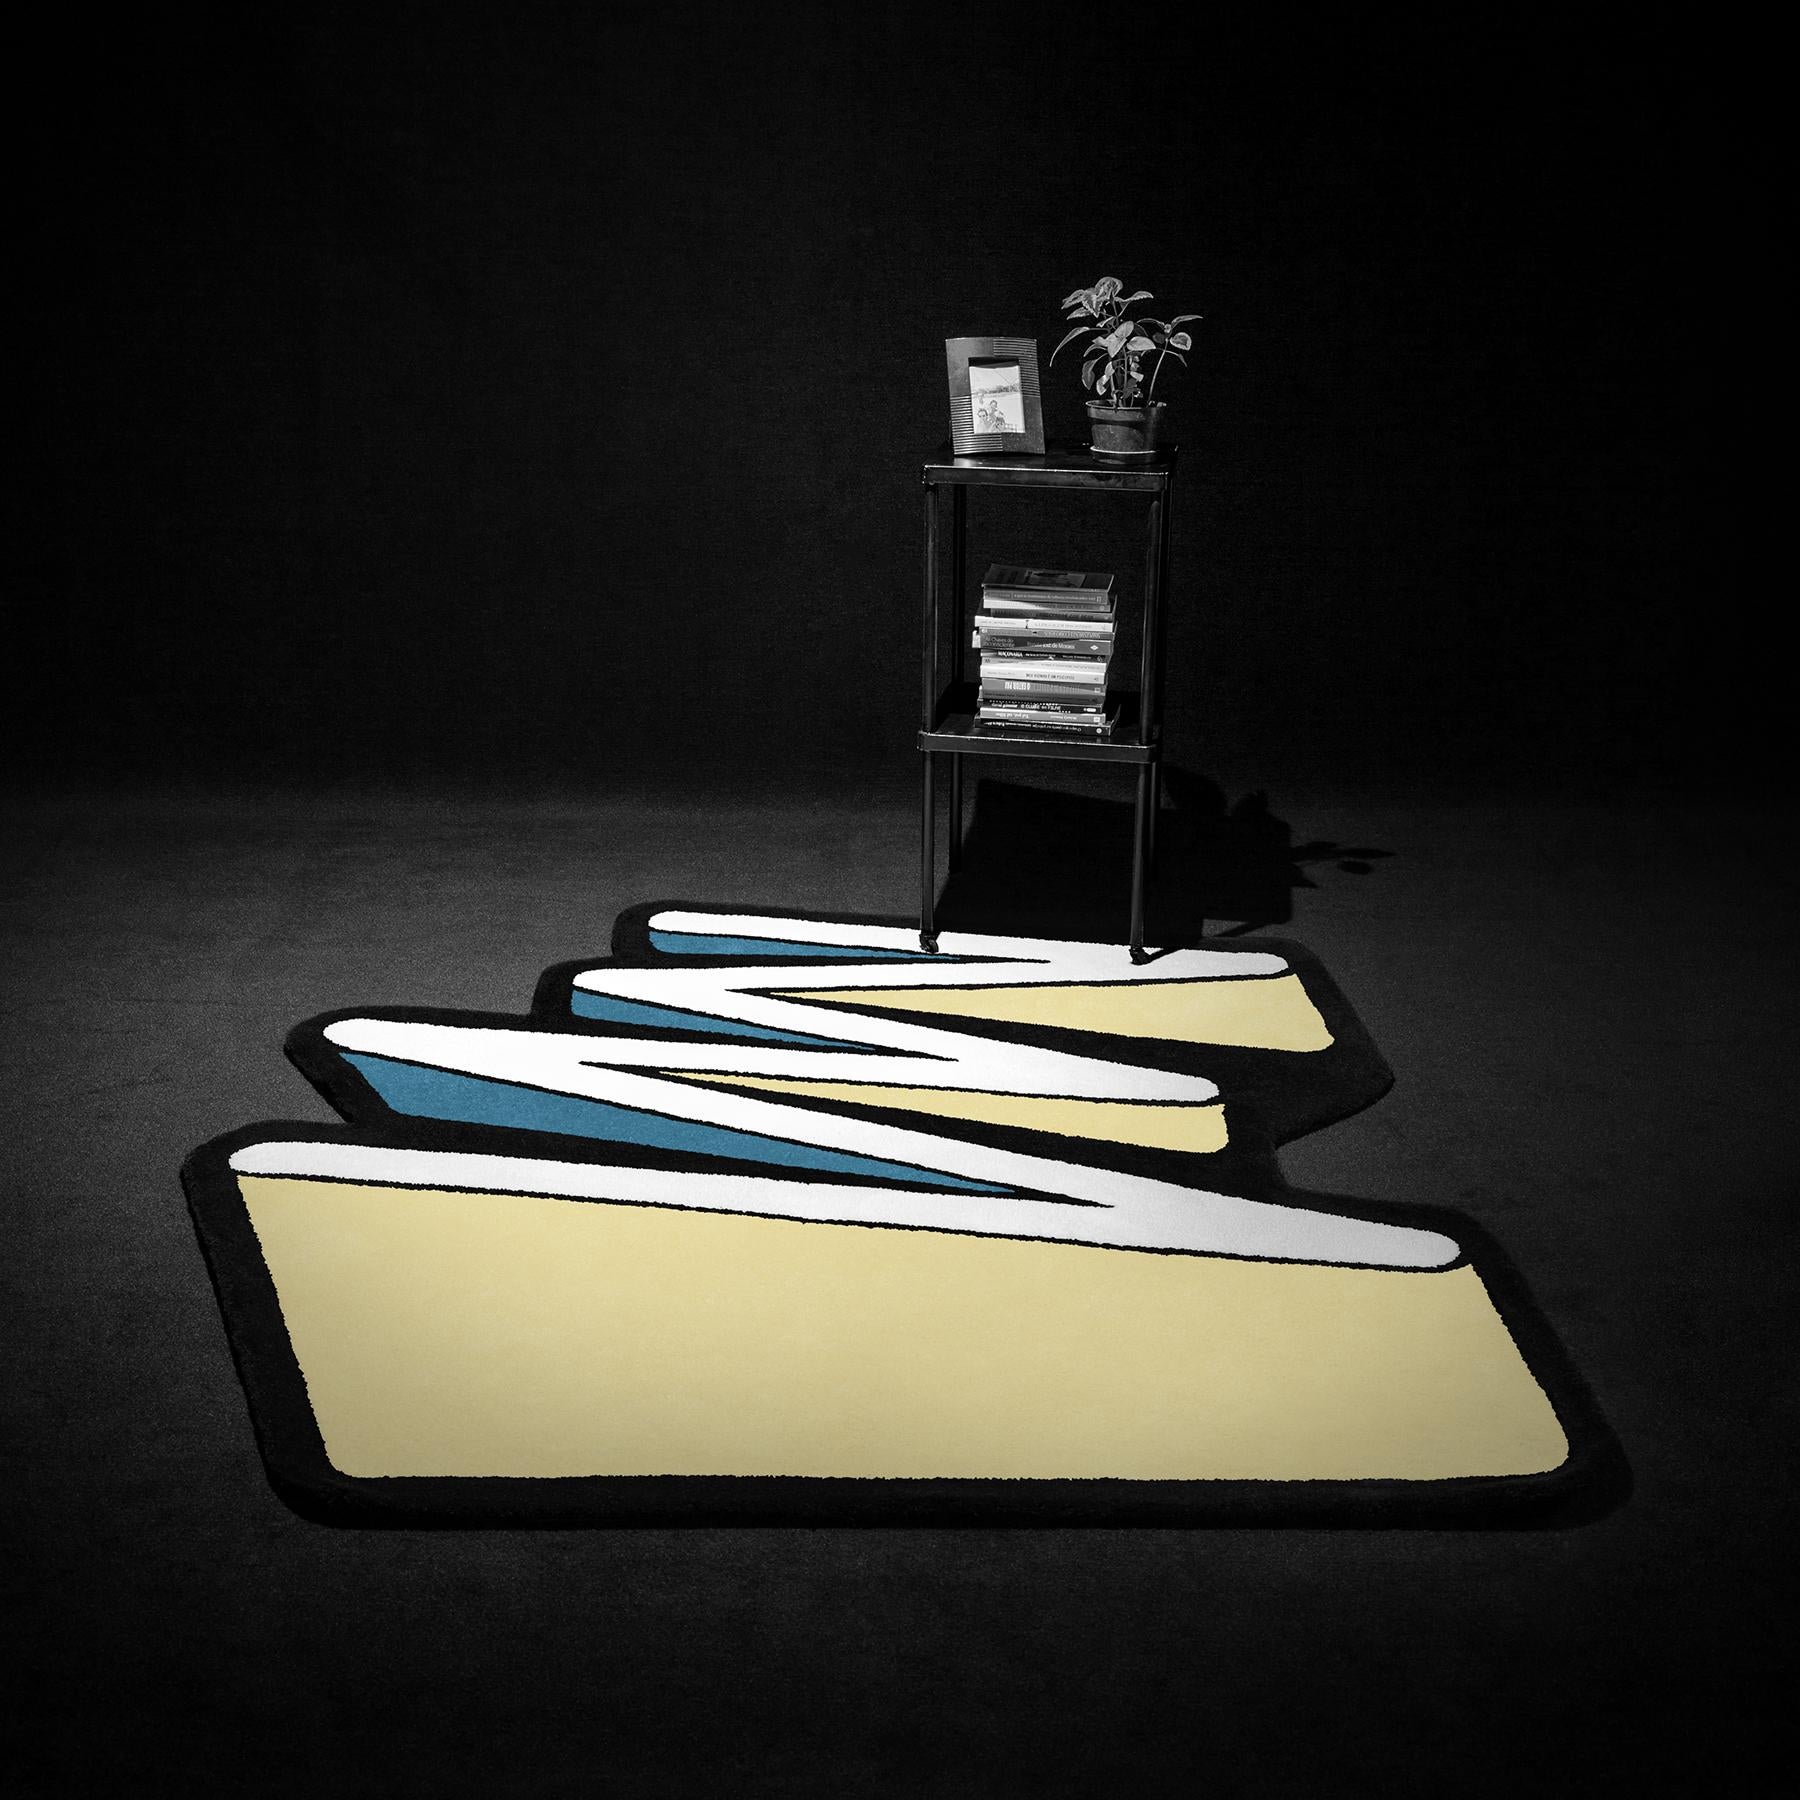 Brazilian Playful 4 Colors Zigzag Rug from Graffiti Collection by Paulo Kobylka, Large For Sale